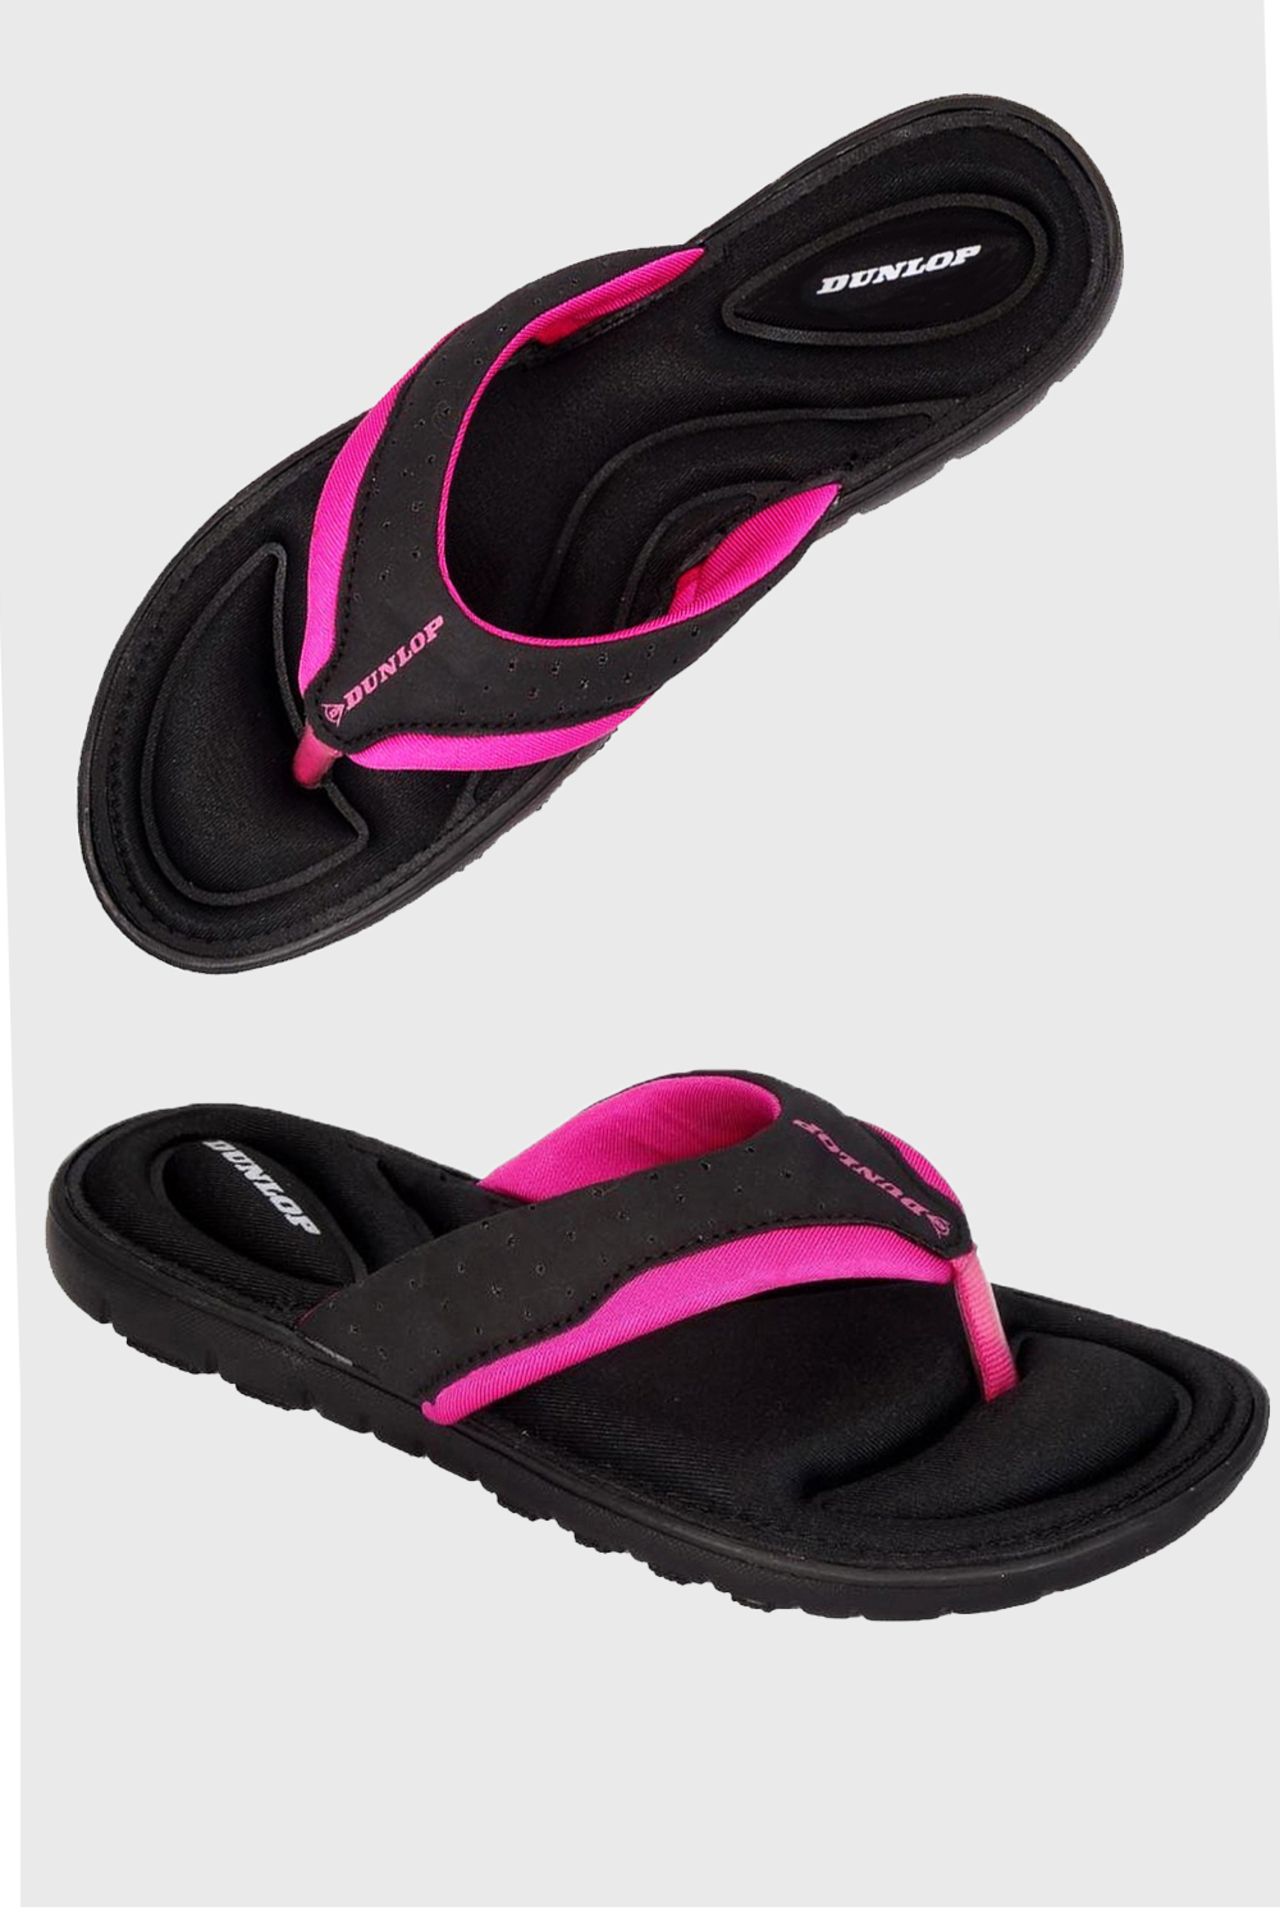 22 X BRAND NEW DUNLOP MEMORY FOAM FLIP FLOPS IN BLACK / PINK - IN MIXED SIZES TO INCLUDE UK 5 / UK 7